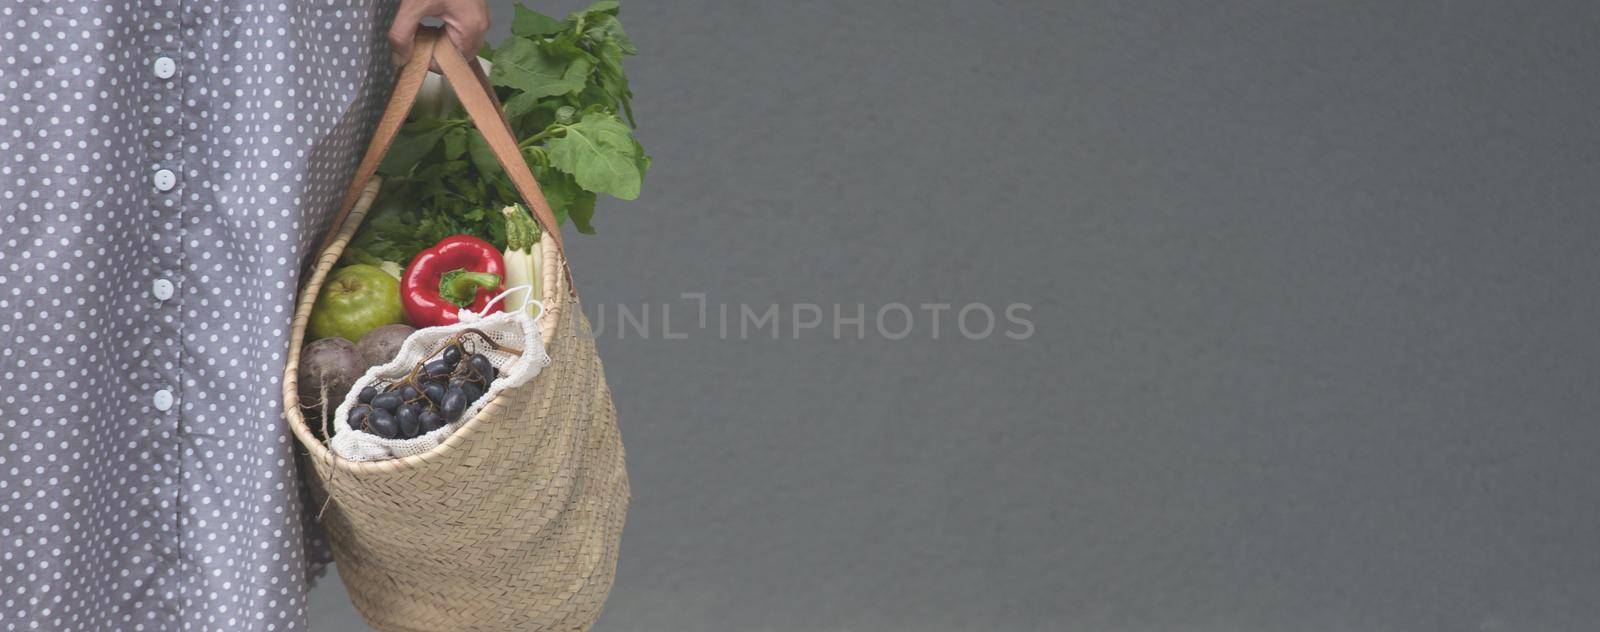 woman is holding straw back for shopping with products without plastic packaging. minimalistic concept